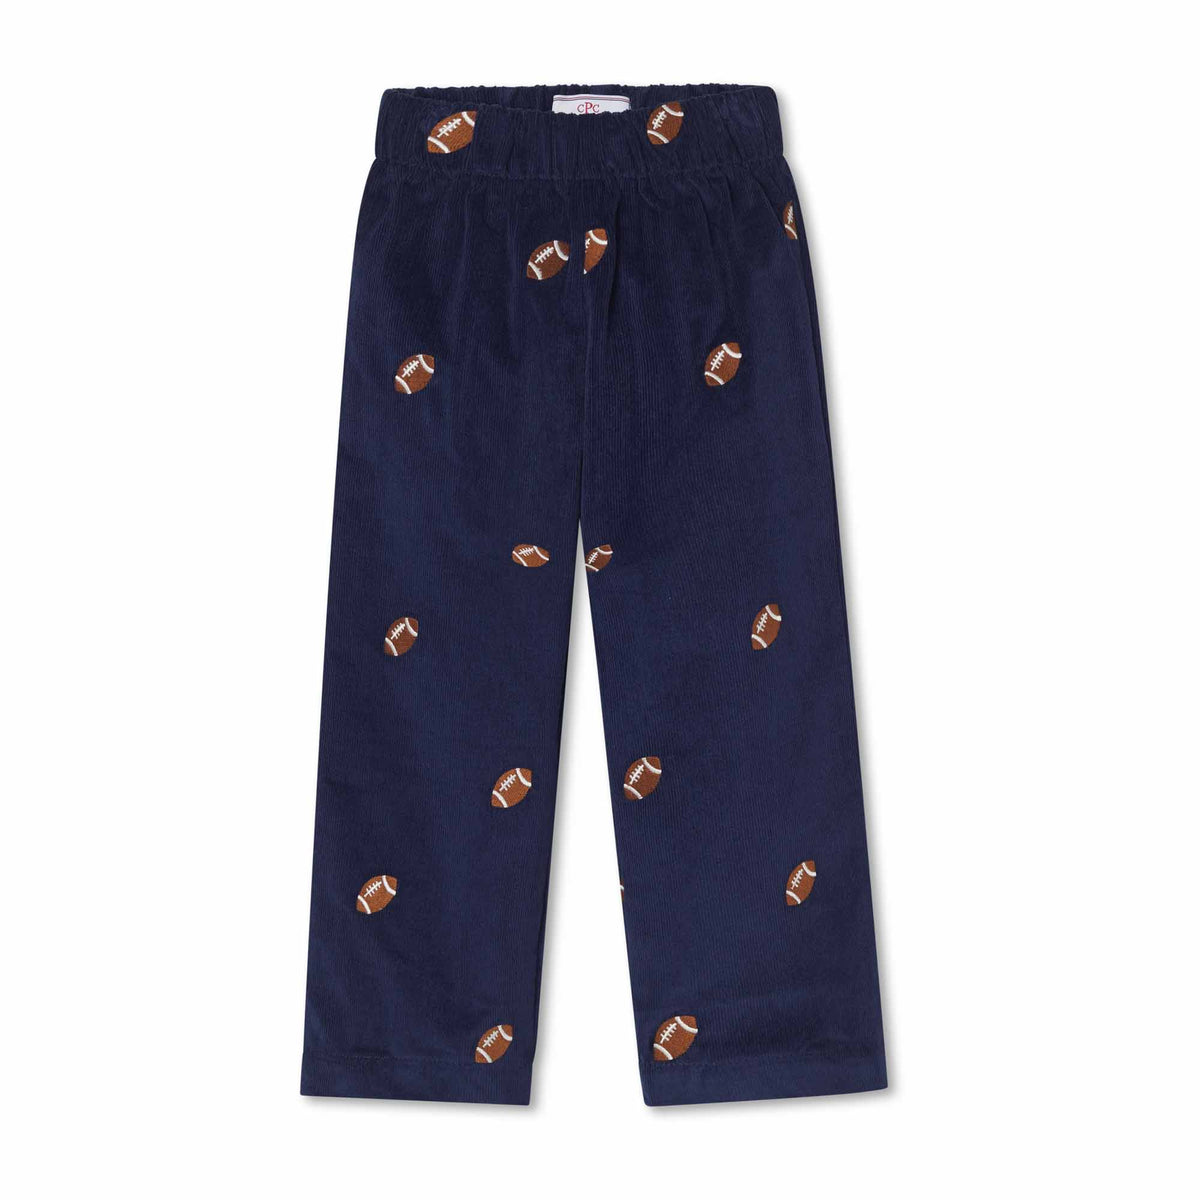 Classic and Preppy Myles Pant, Medieval Blue Cord with Footballs-Bottoms-Medieval Blue W/ Footballs-9-12M-CPC - Classic Prep Childrenswear